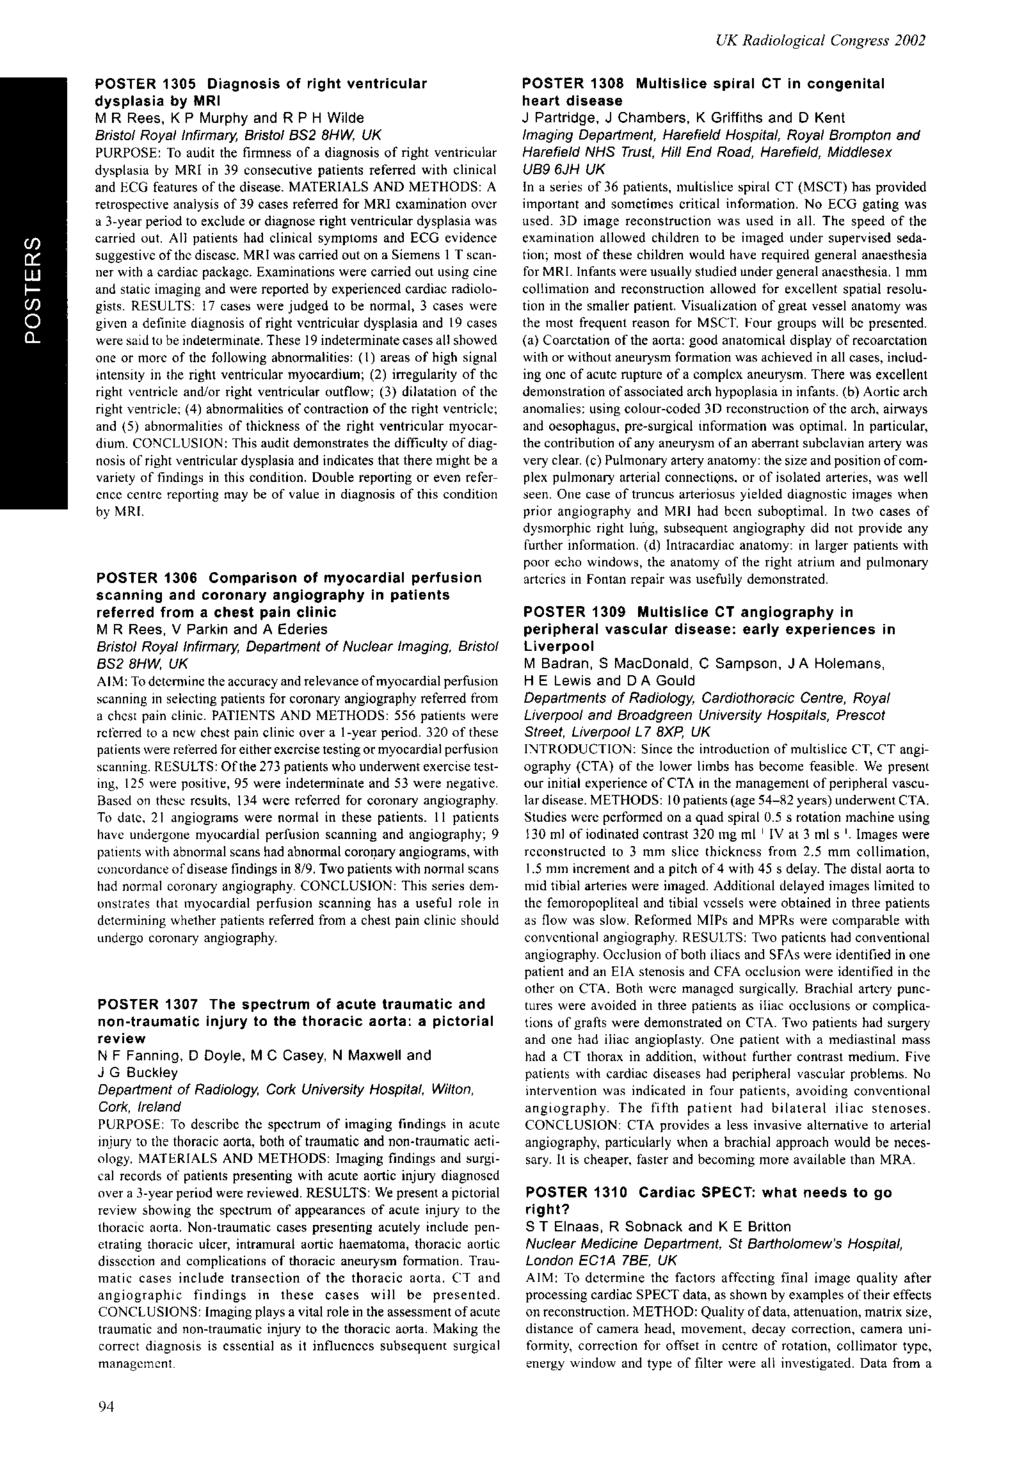 POSTER 305 Diagnosis of right ventricular dysplasia by MRI M R Rees, K P Murphy and R P H Wilde Bristol Royal Infirmary, Bristol BS2 8HW, UK PURPOSE: To audit the firmness of a diagnosis of right